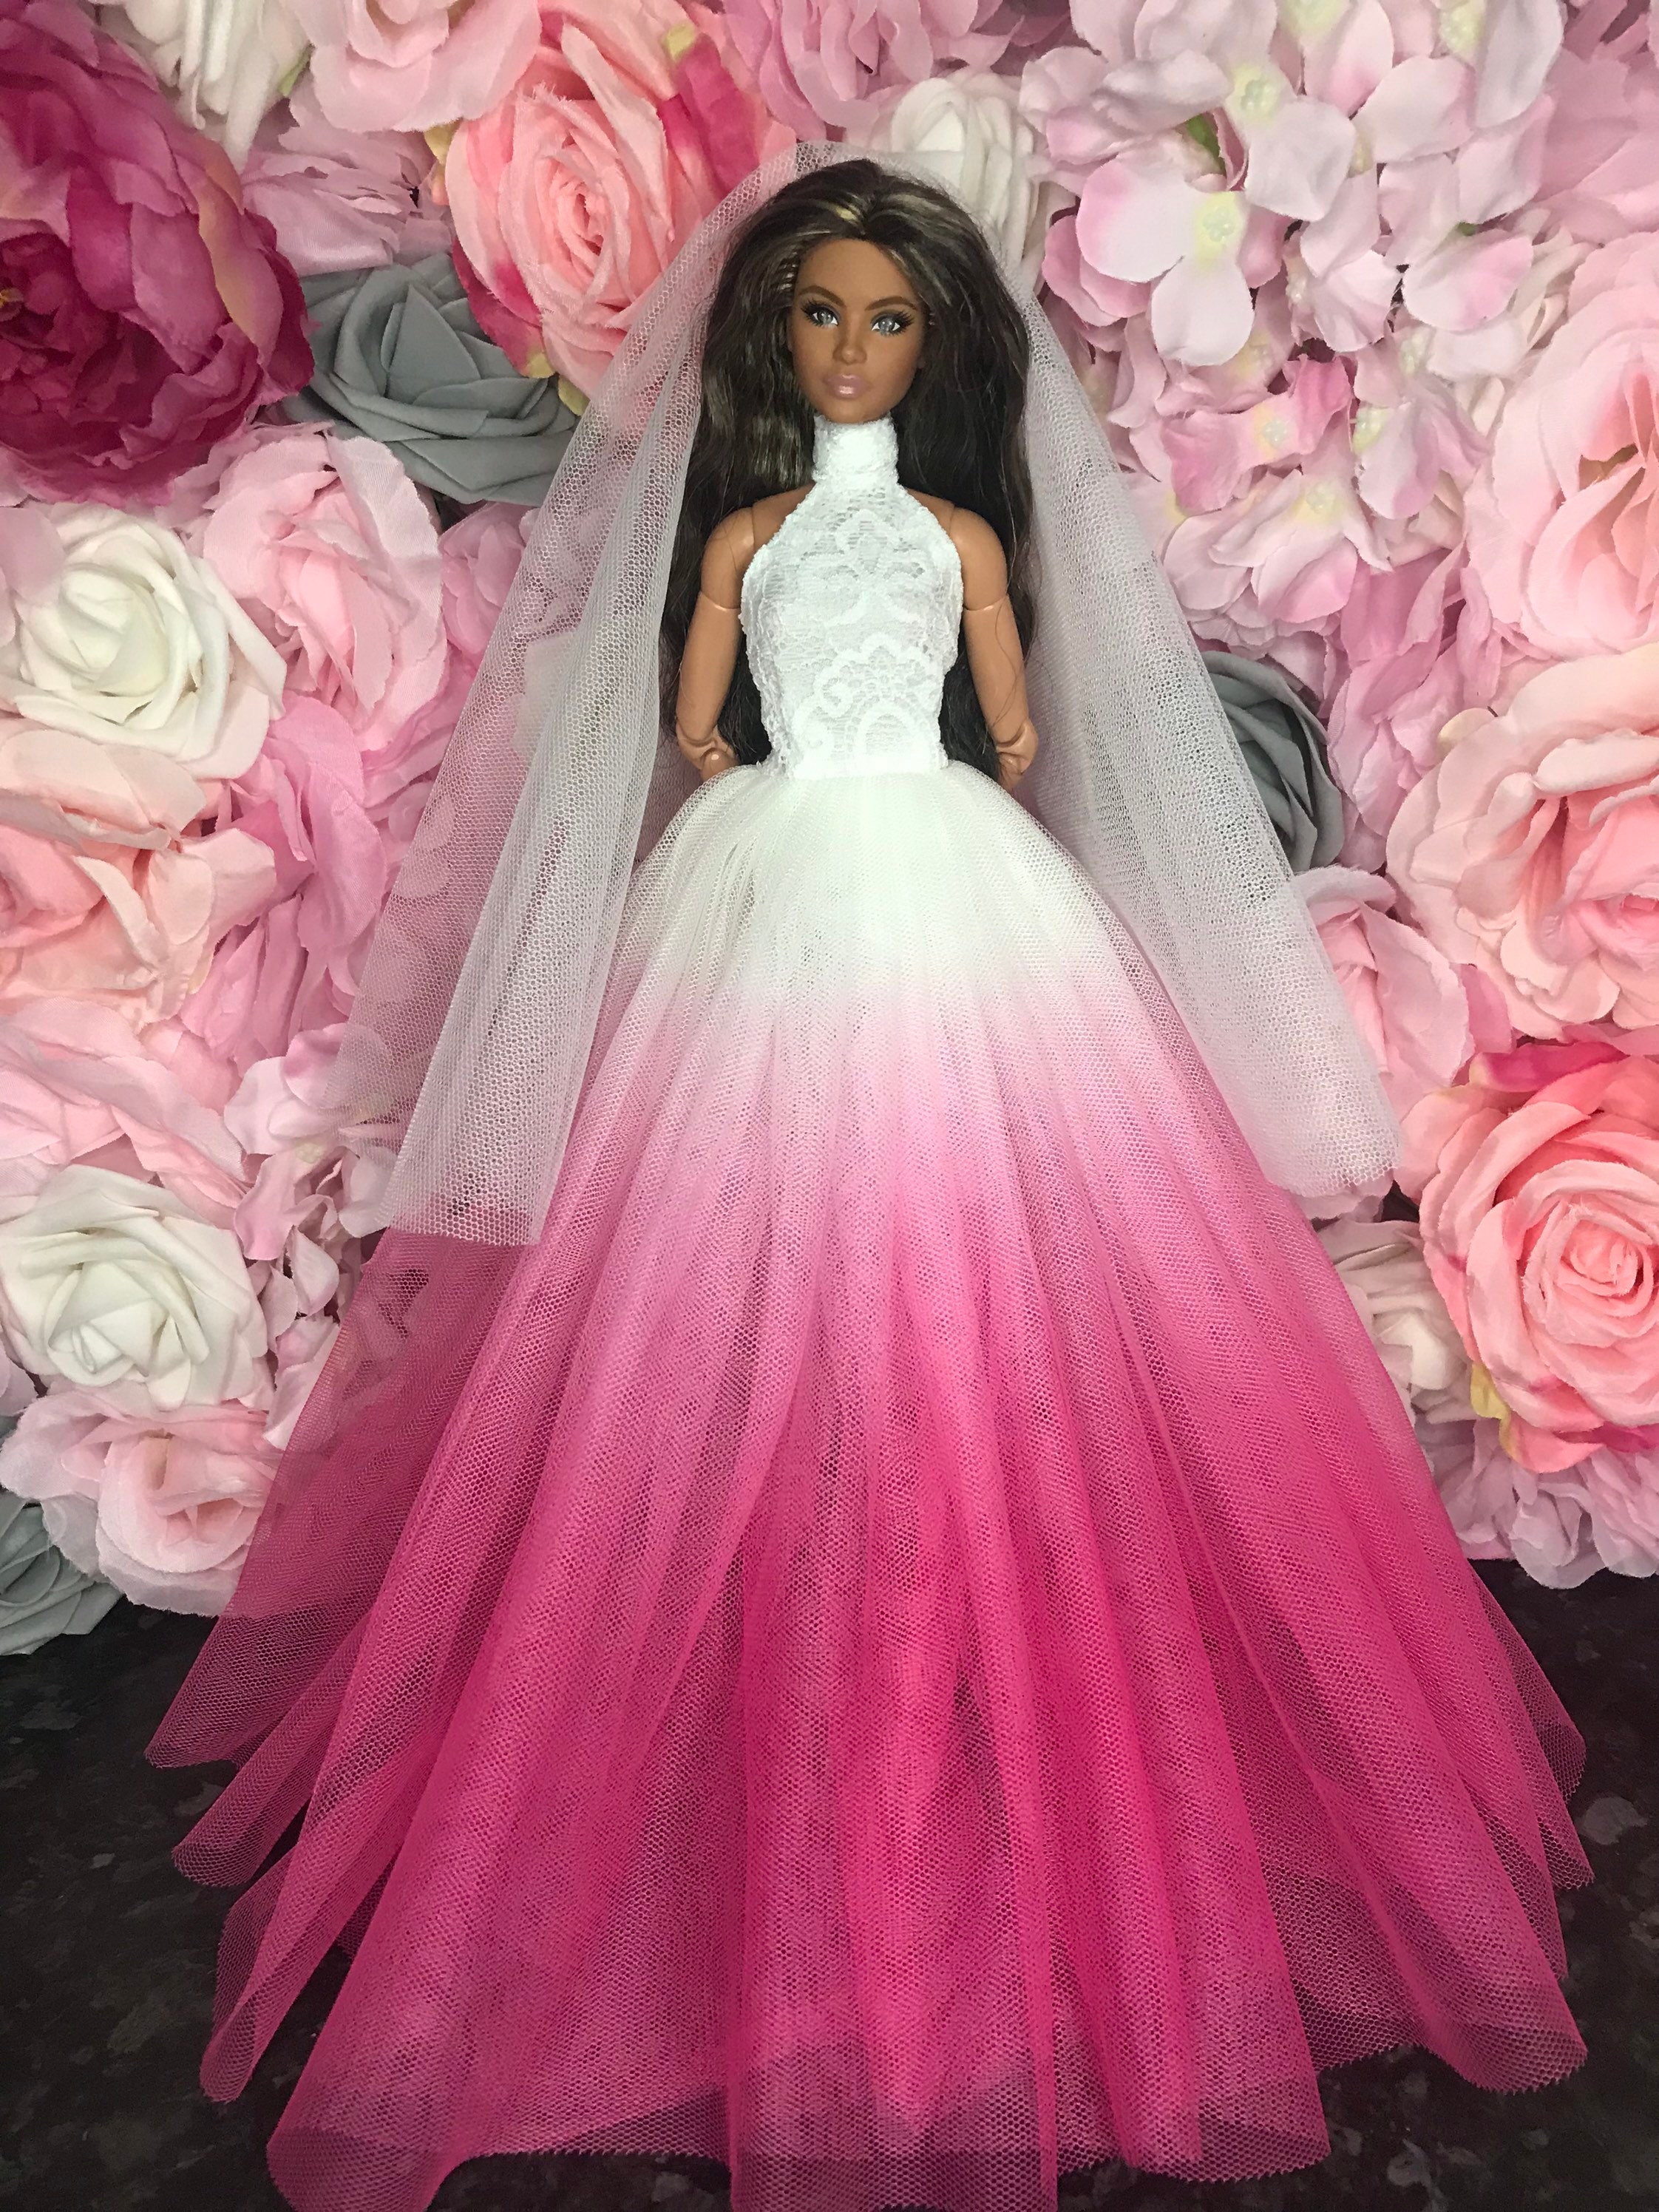 E Ting 2 Pcs Handmade Gorgeous Sequined Party Dress Ball Gown Doll Clothes  For Barbie Dolls : Amazon.in: Toys & Games